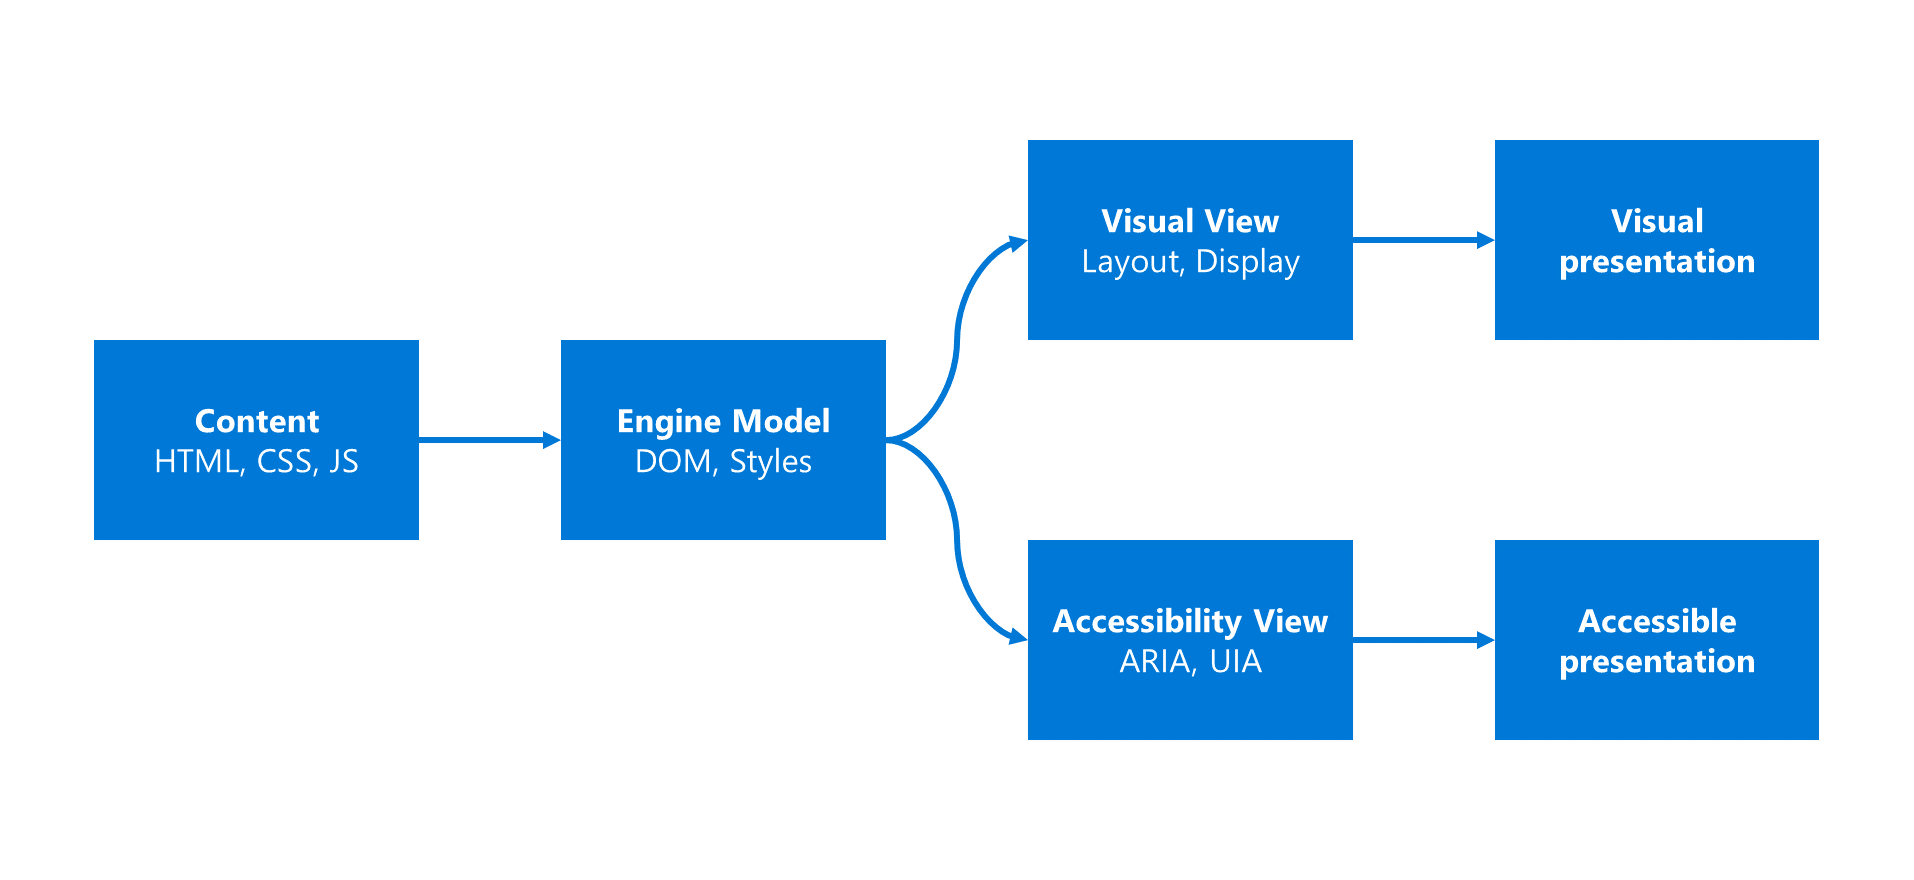 Flowchart showing the simplified browser pipeline. Figure 1. Content transformed to the engine model is projected into visual and accessibility views that are presented either as visual or accessible presentation.